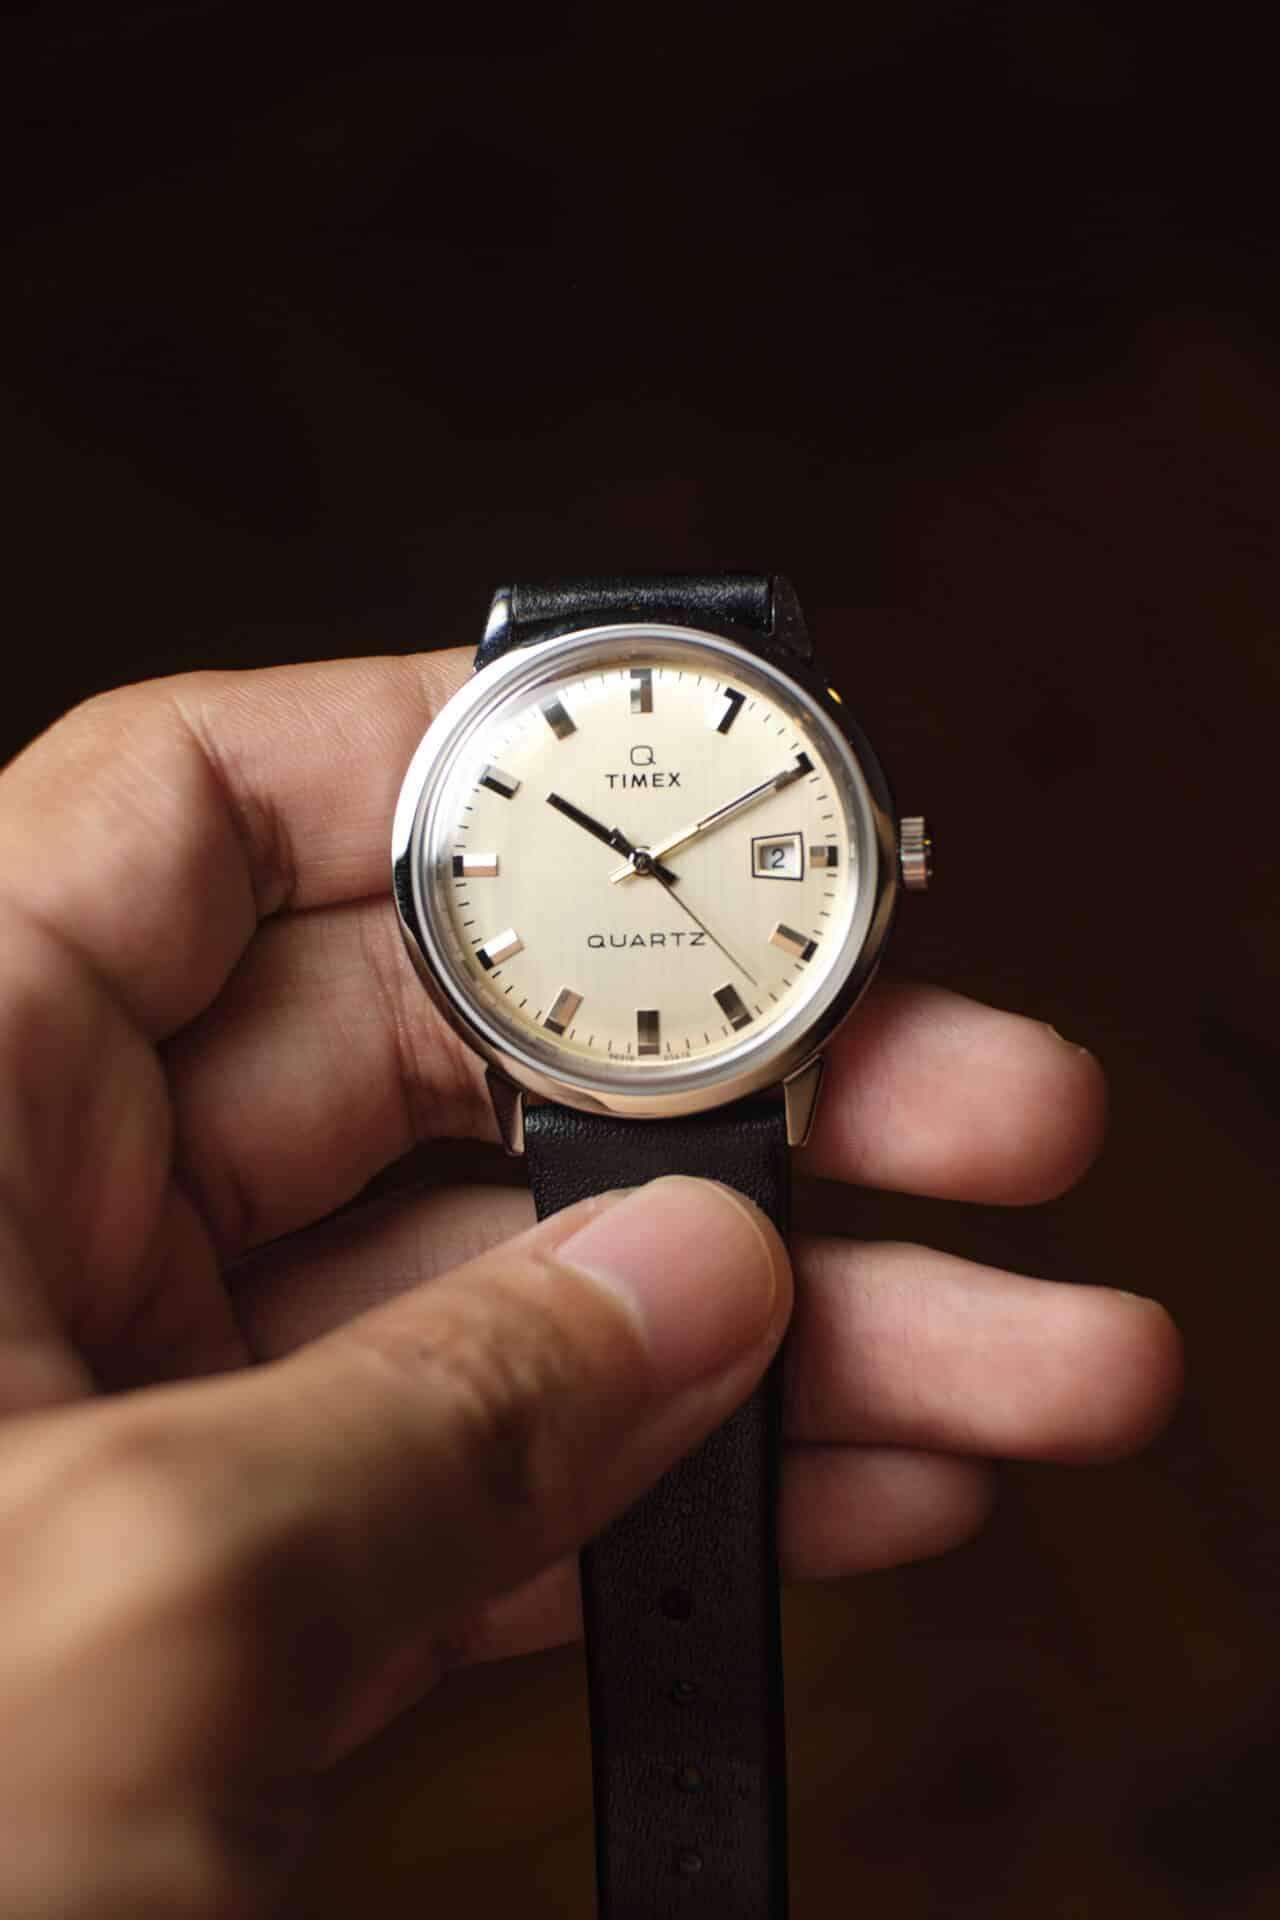 Timex Q 1978 Reissue Date Review: Refinement for Less